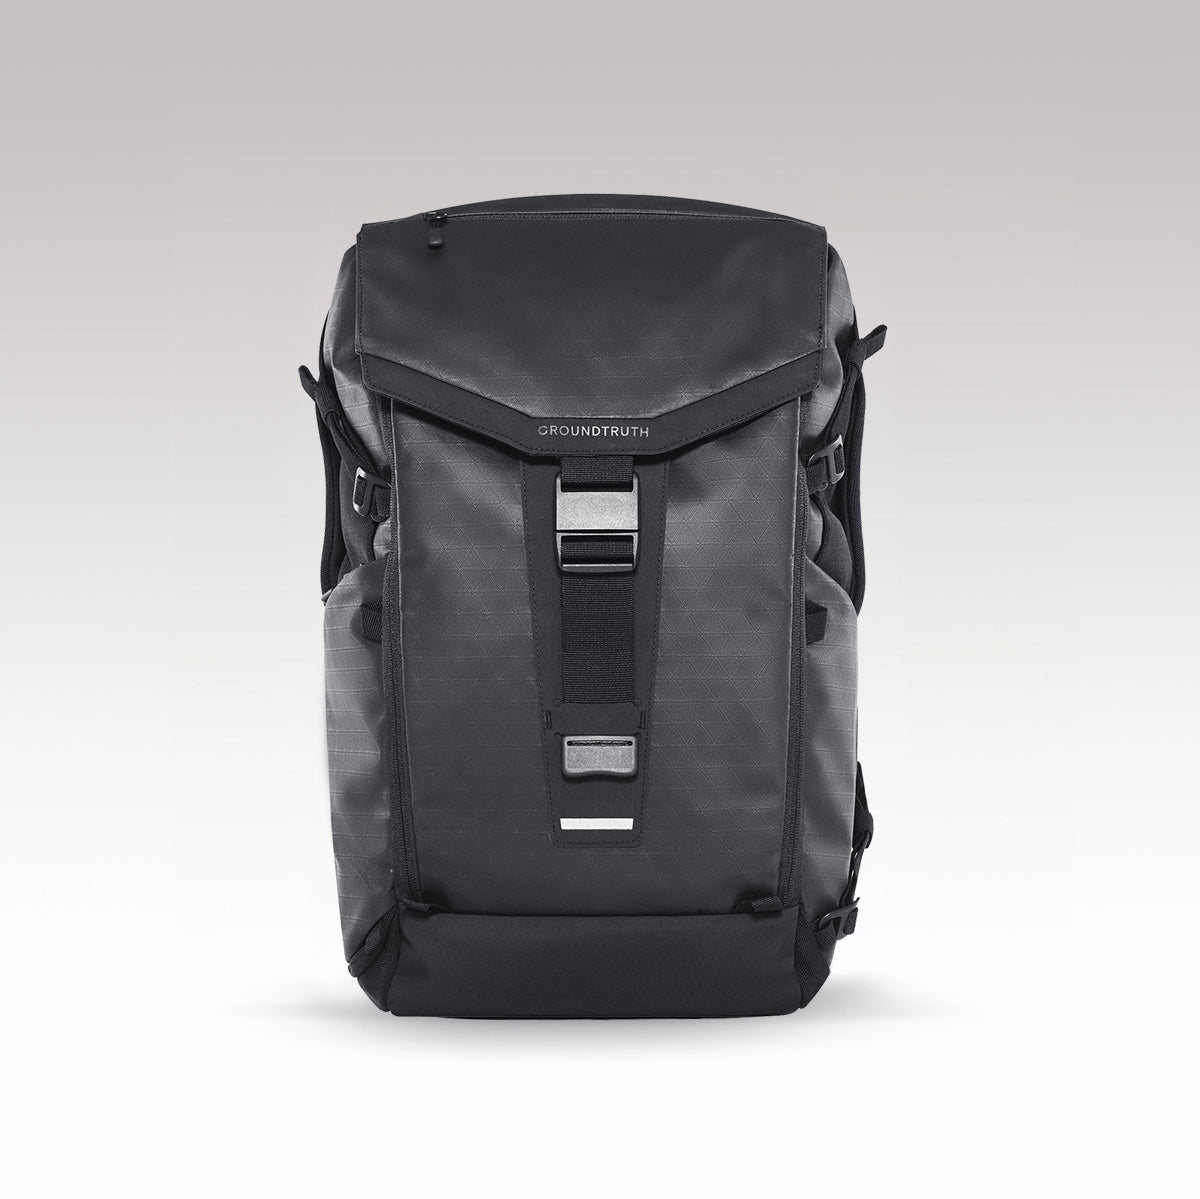 The photographer bundle, 24L backpack and Camera bag